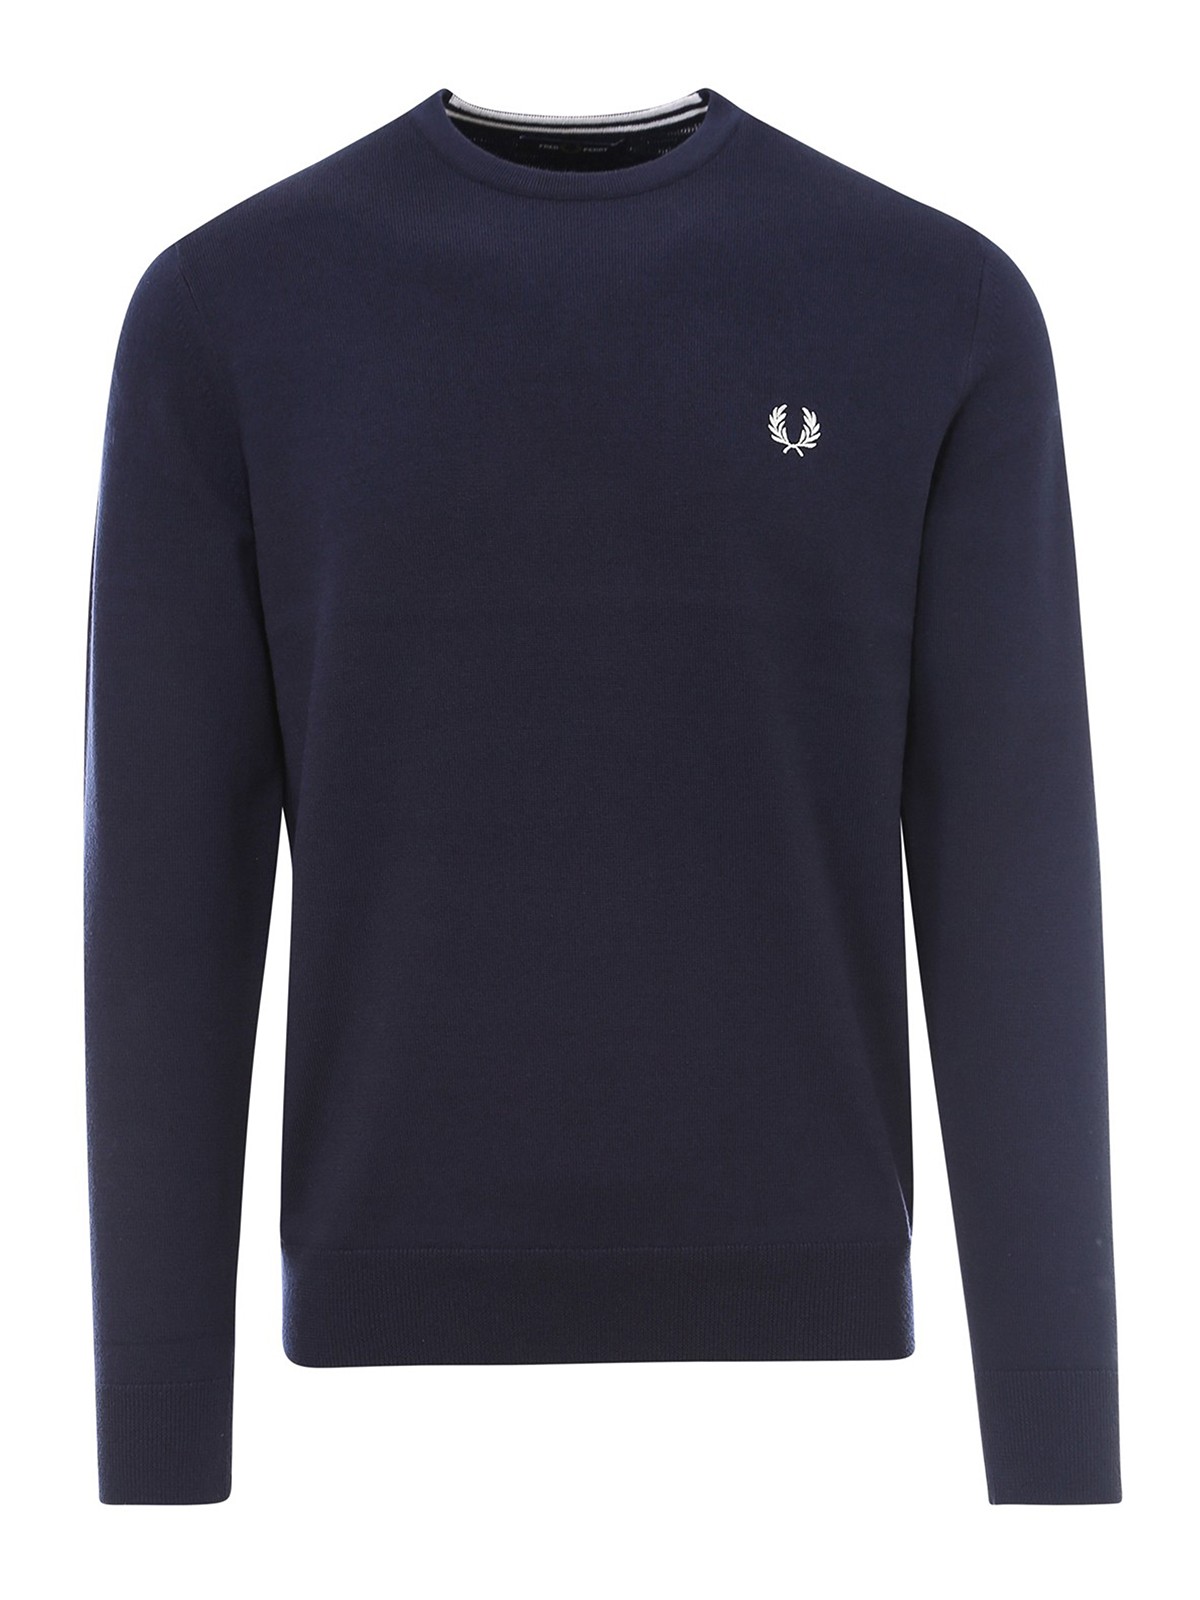 Fred Perry - Wool and cotton jumper - crew necks - FPK960135608